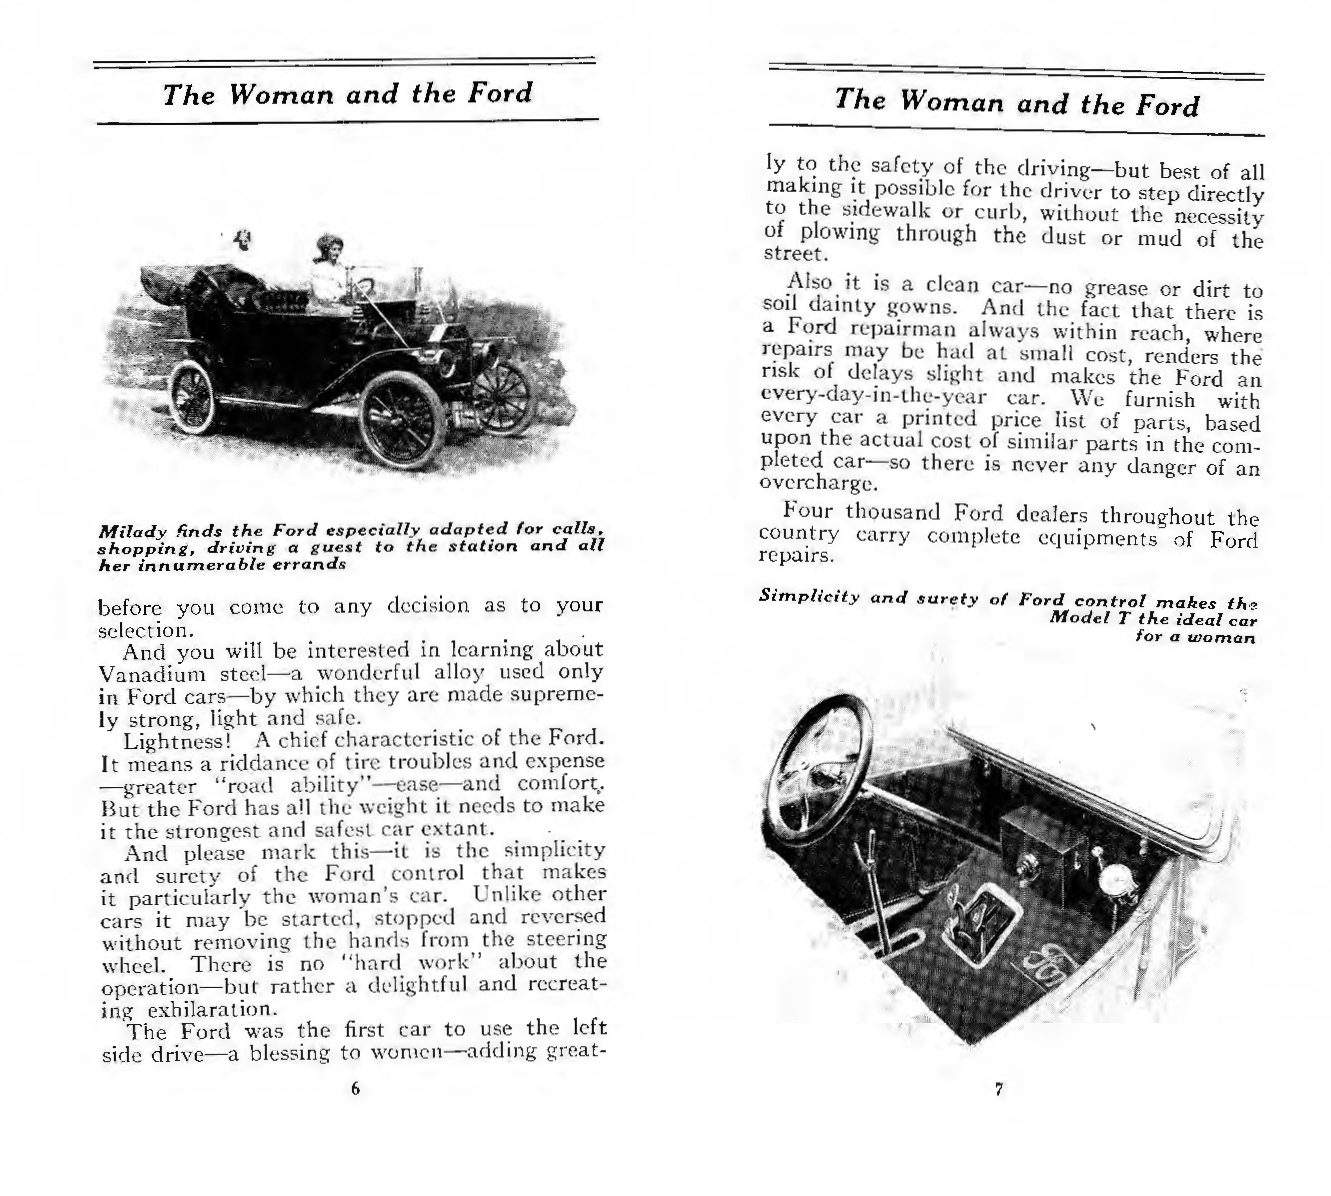 1912_The_Woman__the_Ford-06-07